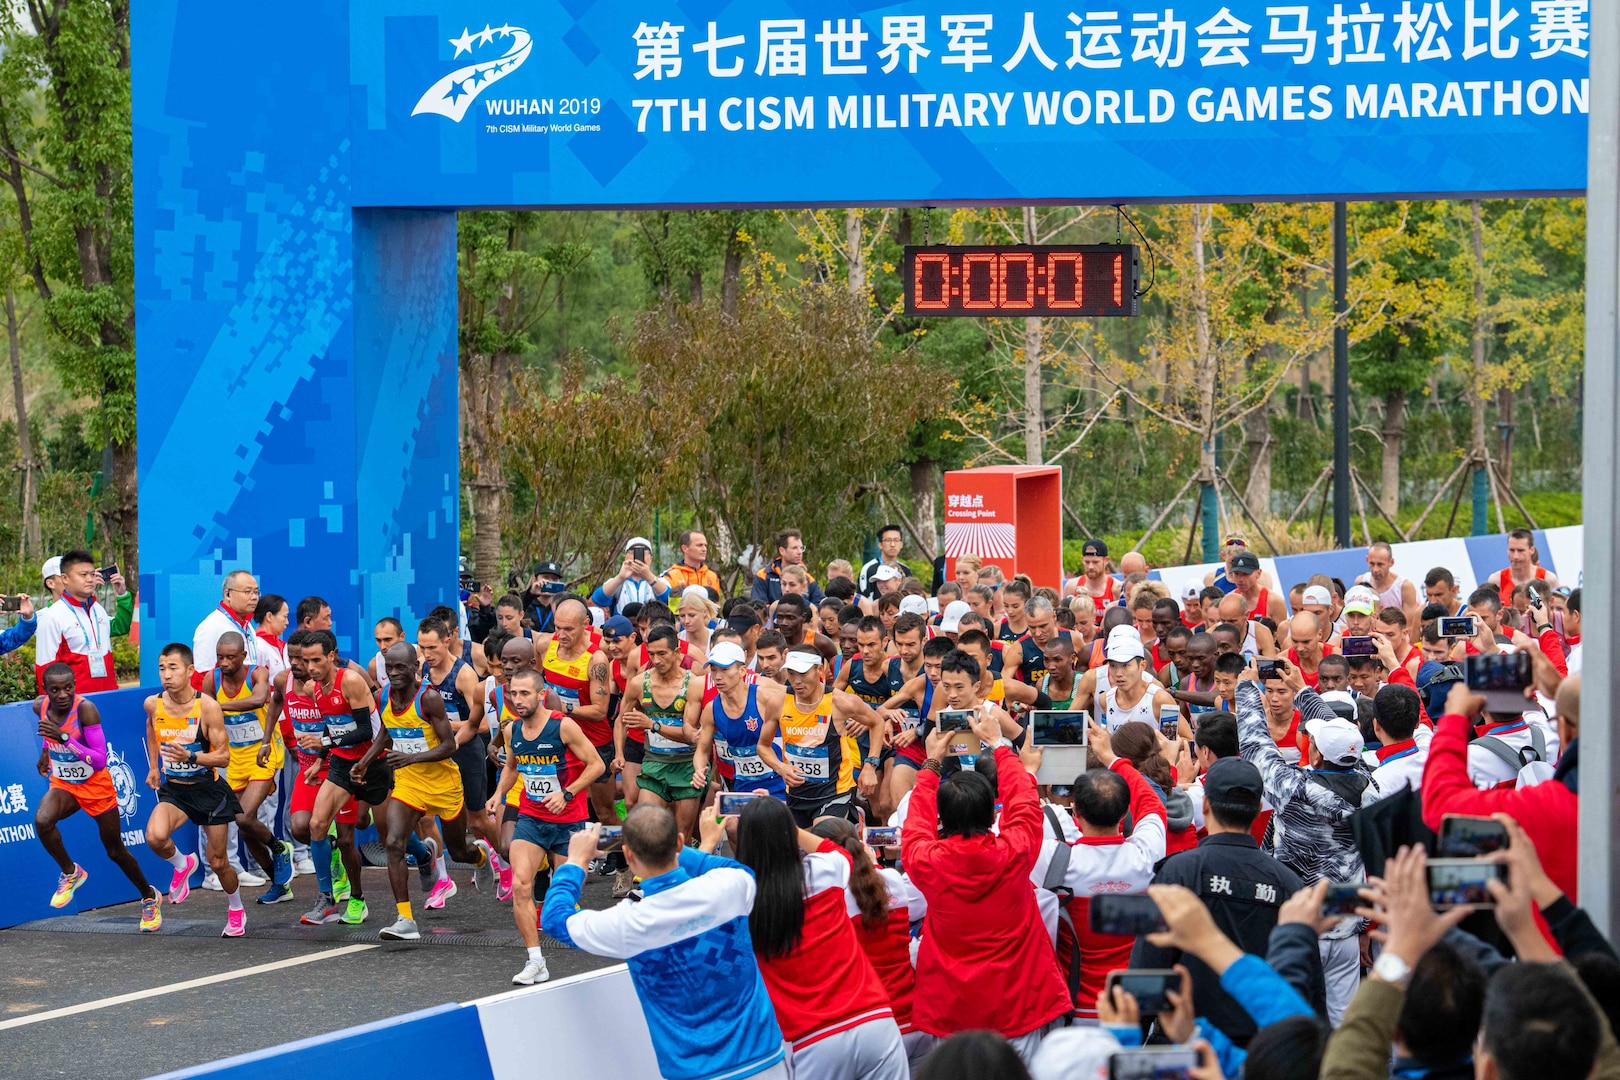 Marathon competitors cross the start line during the 7th Conseil International du Sport Militaire World Games in Wuhan, China Oct. 27, 2019. (U.S. Army photo by Staff Sgt. Vito T. Bryant)